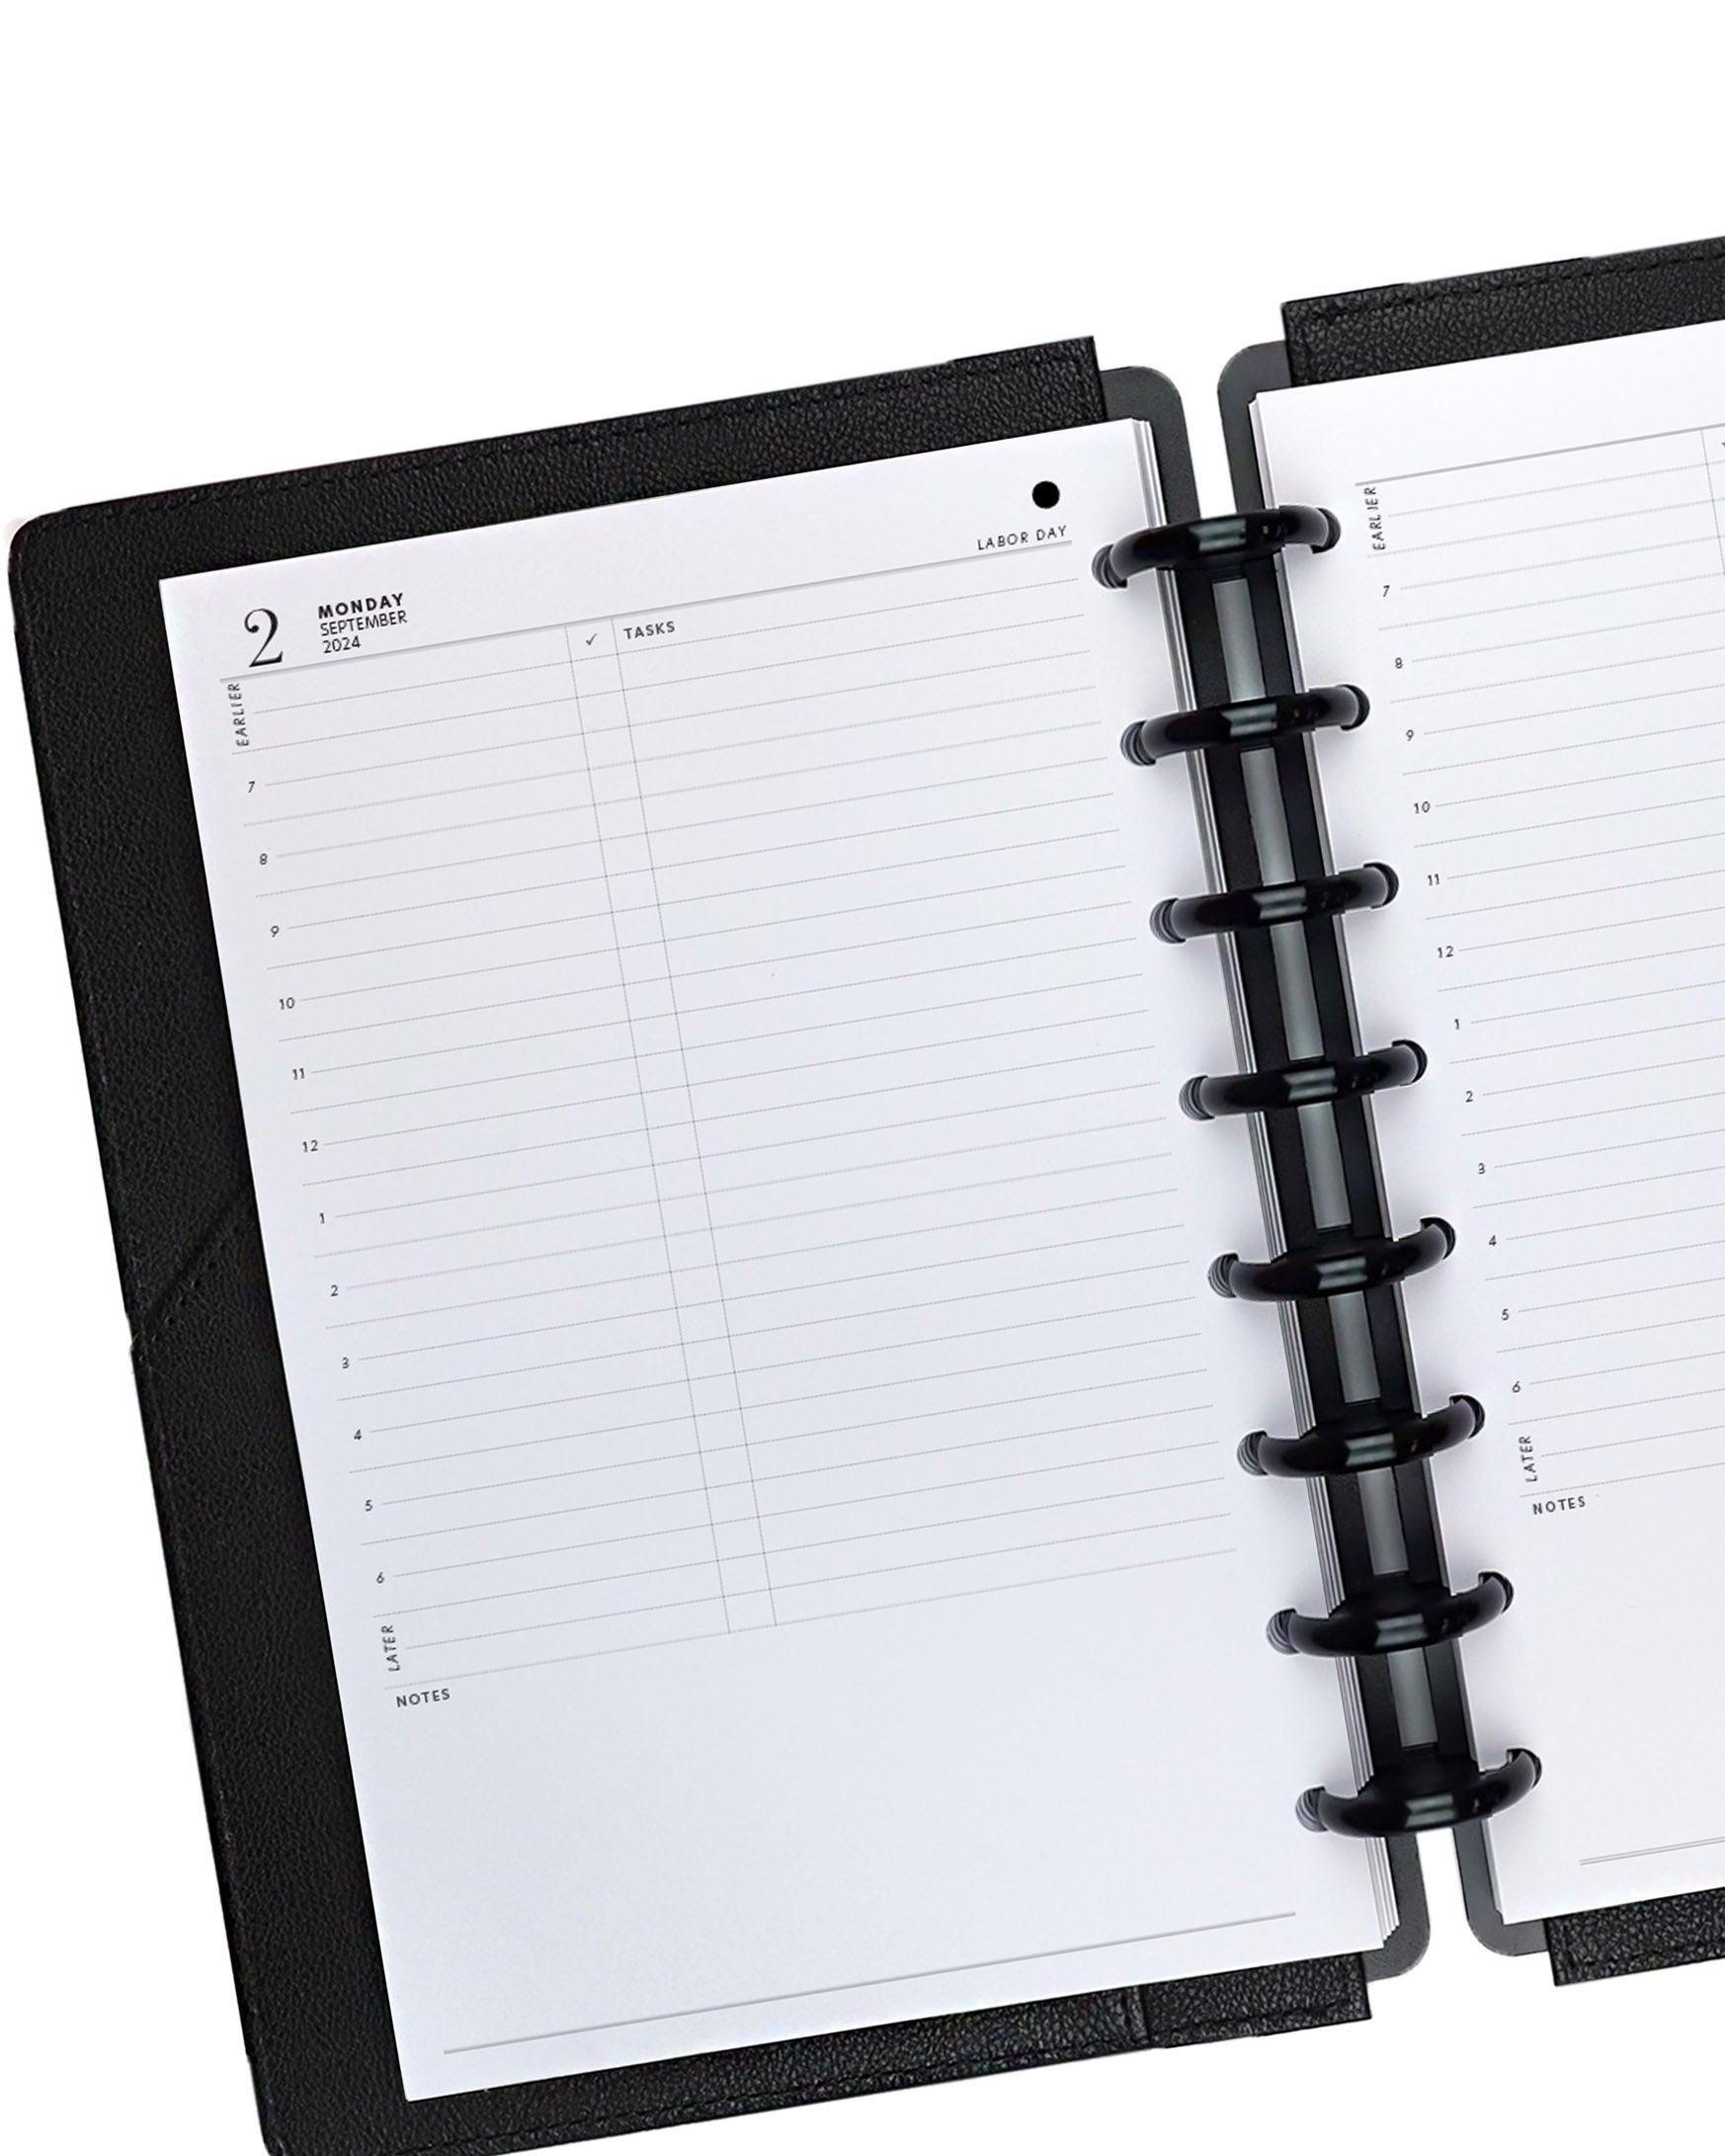 Daily Planner Inserts for discbound planners and ringbound planner systems by Jane's Agenda.